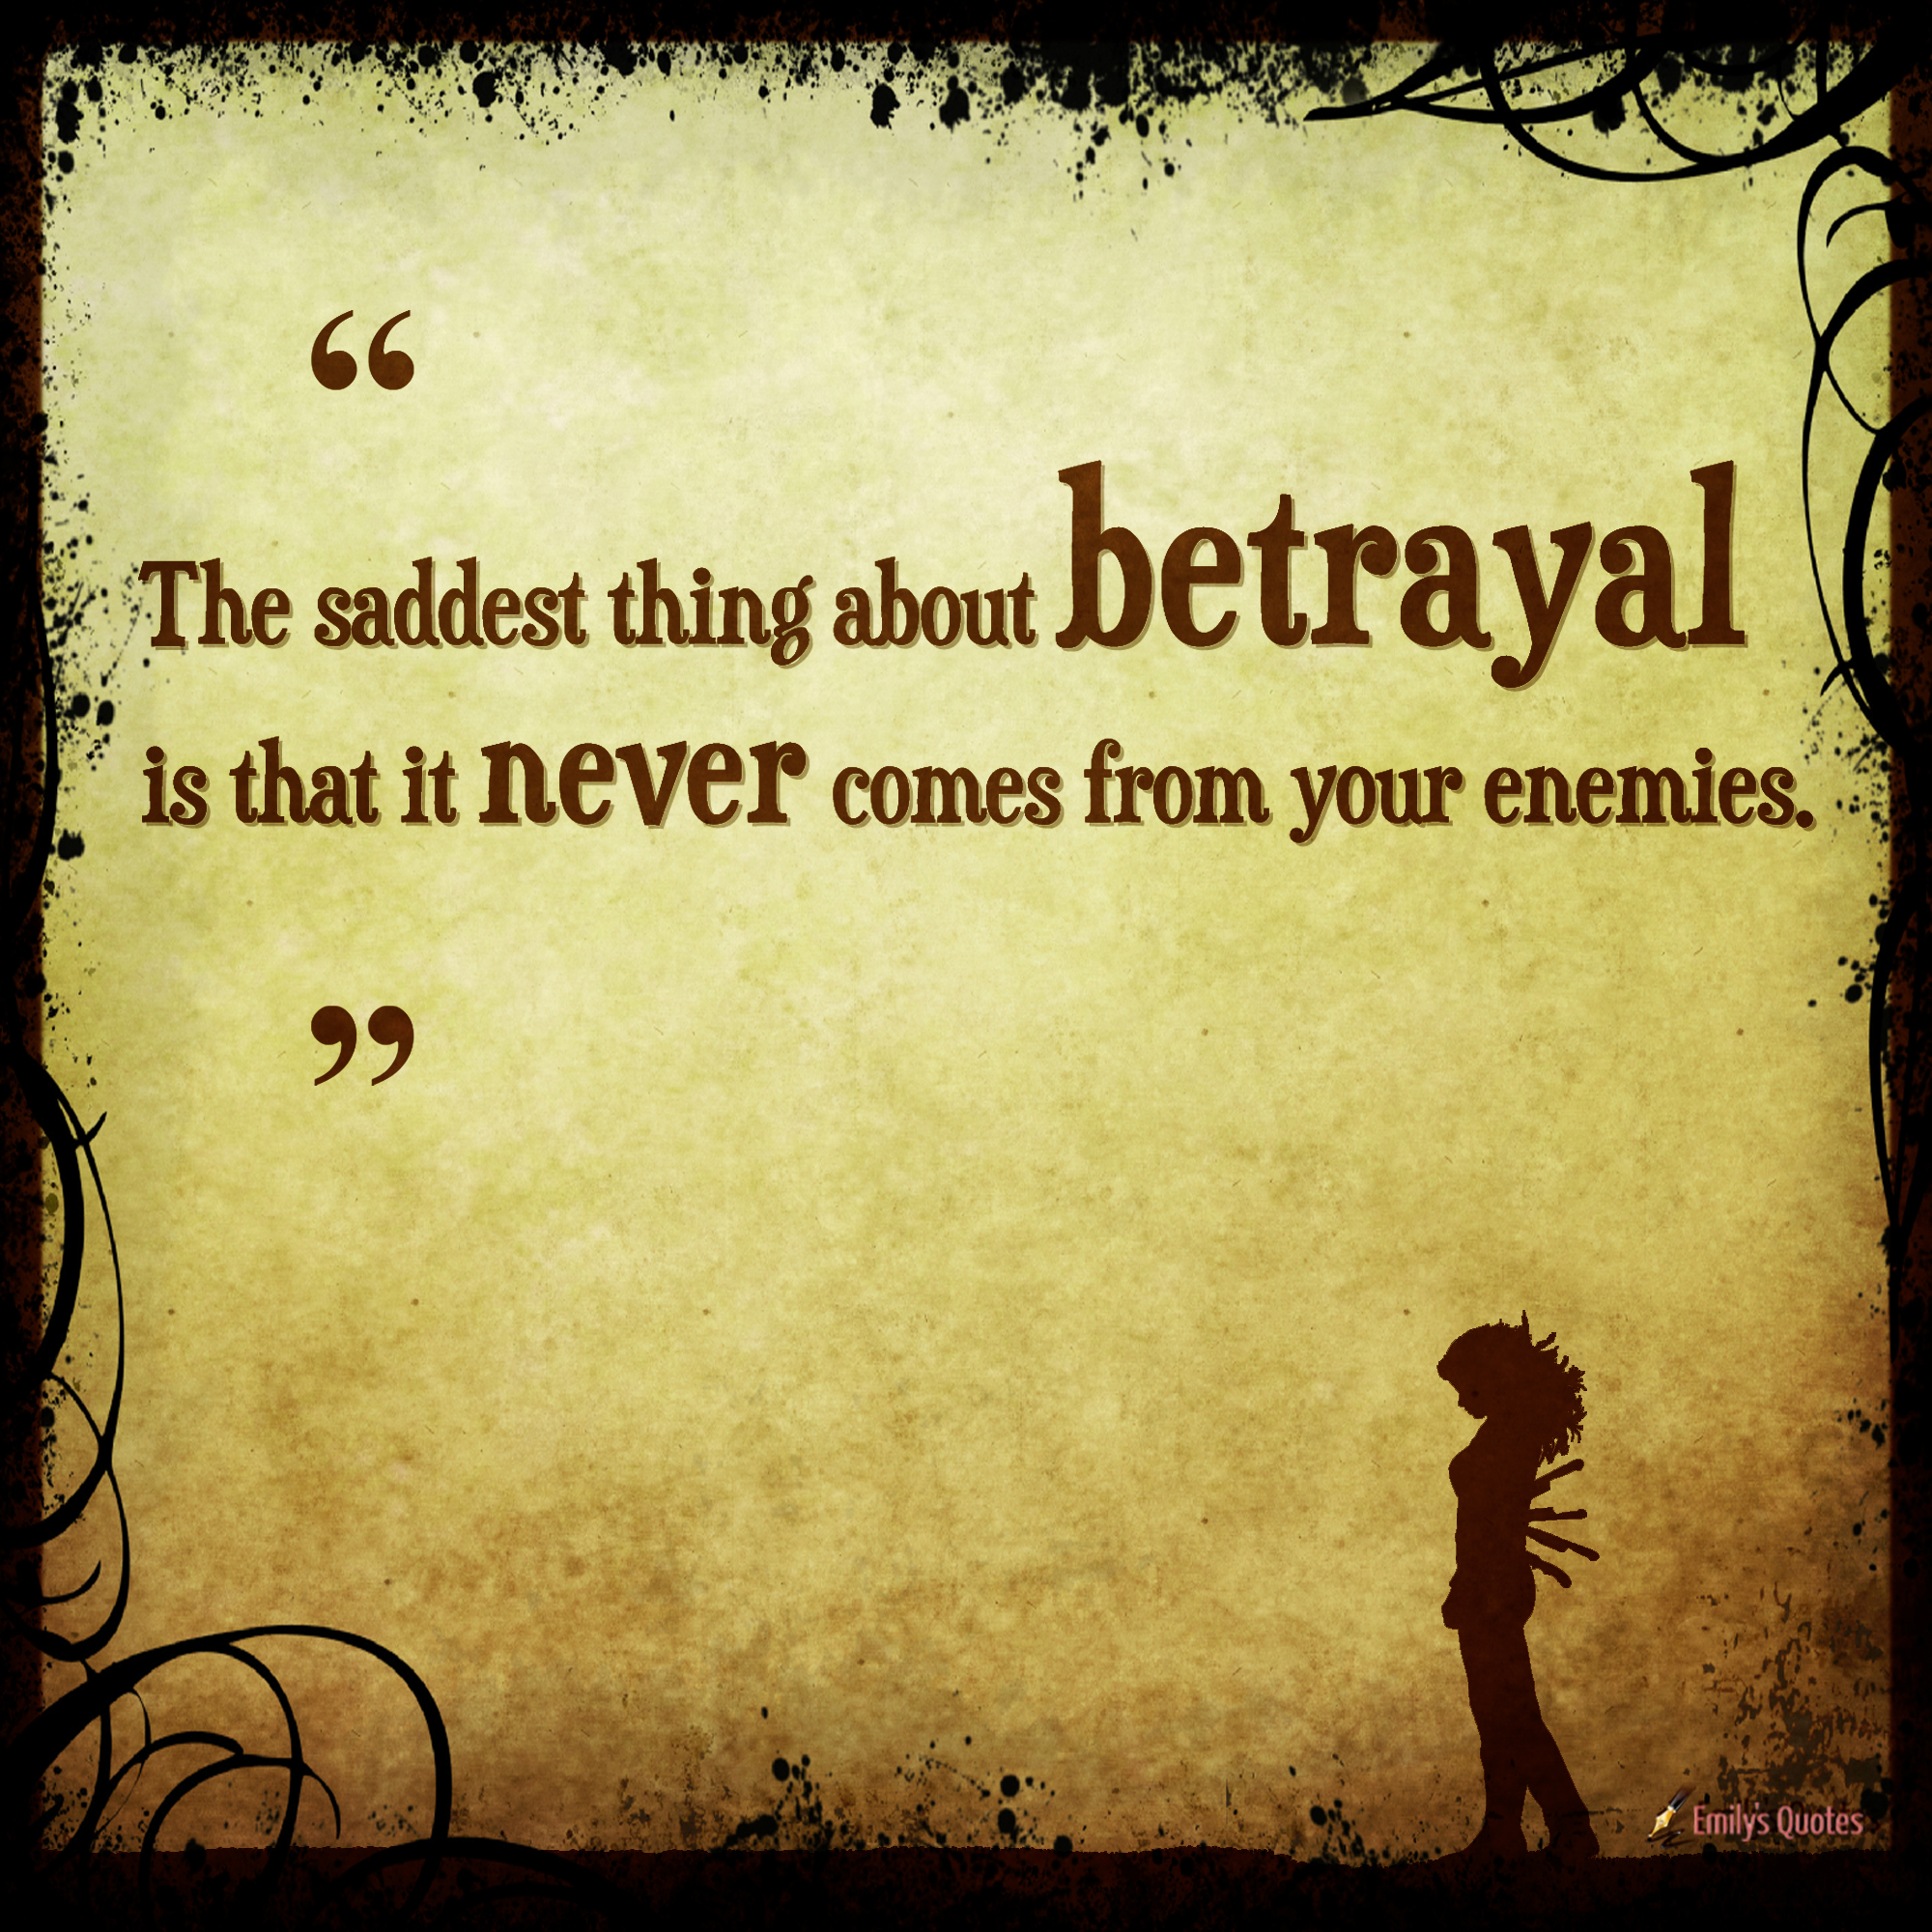 The saddest thing about betrayal is that it never comes from your enemies